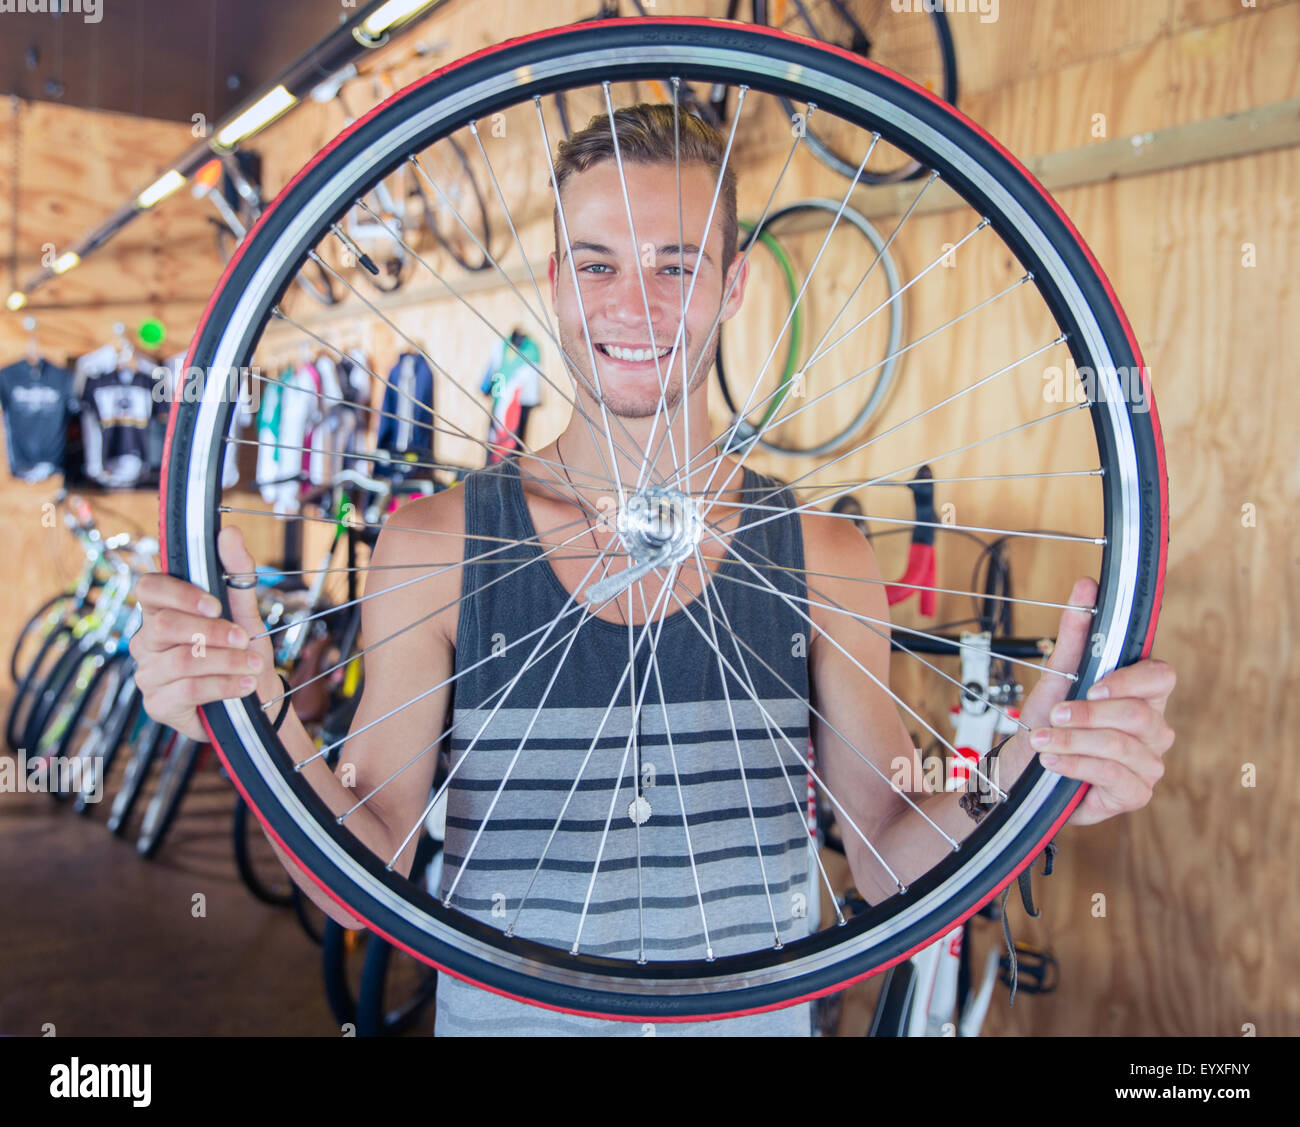 Portrait smiling young man holding bicycle wheel in bicycle shop Stock Photo